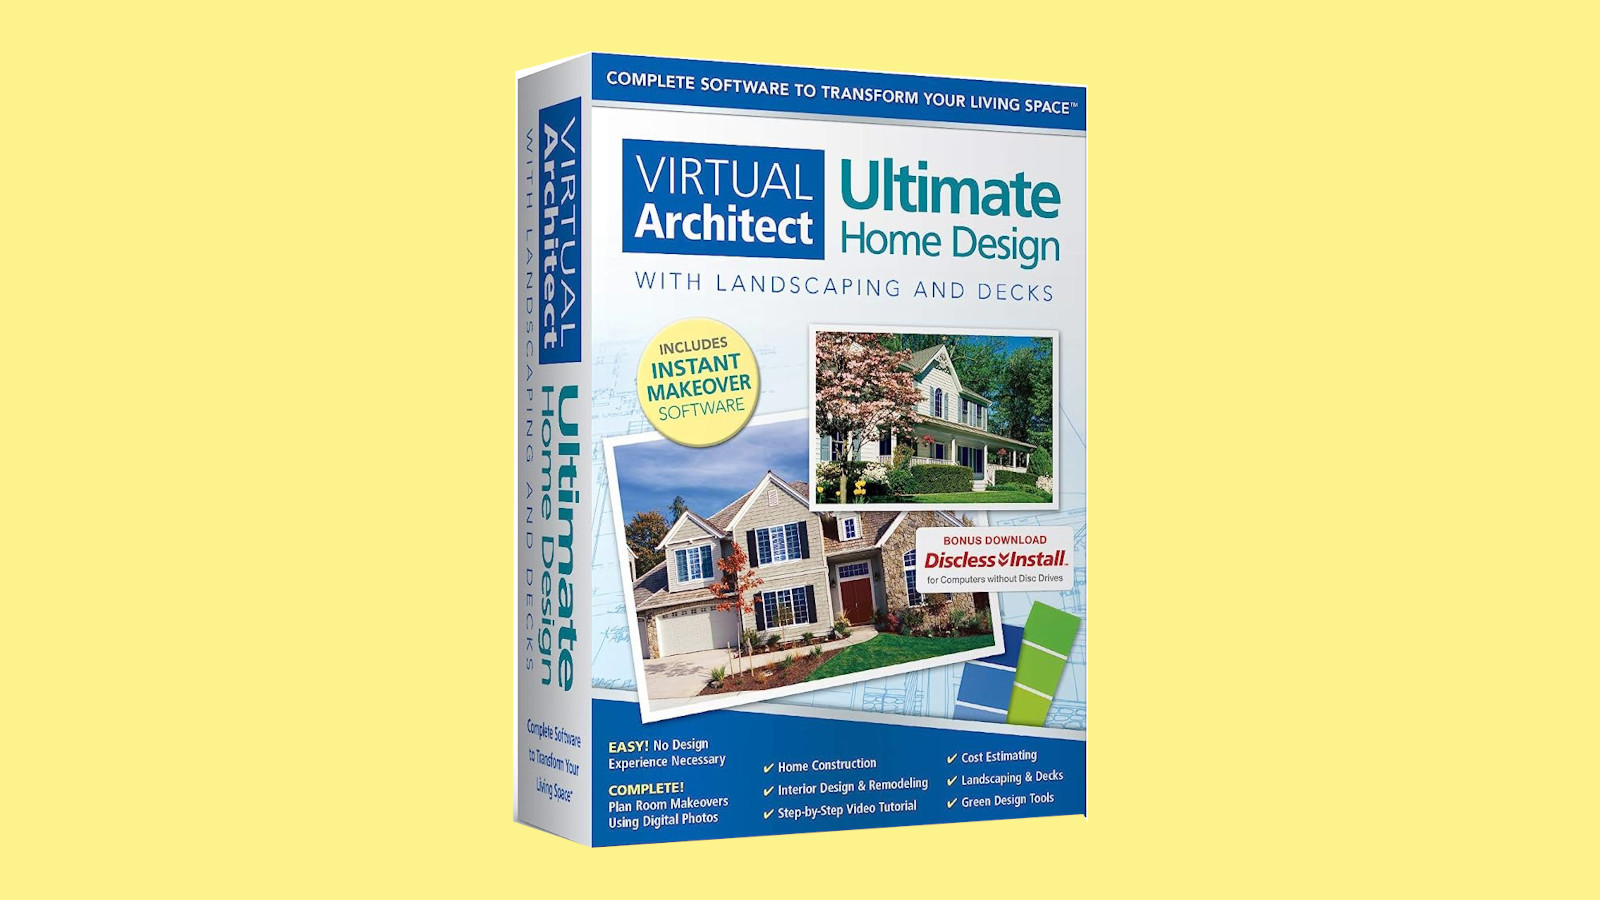 Virtual Architect Ultimate Home Design with Landscaping and Decks CD Key, 77.68$